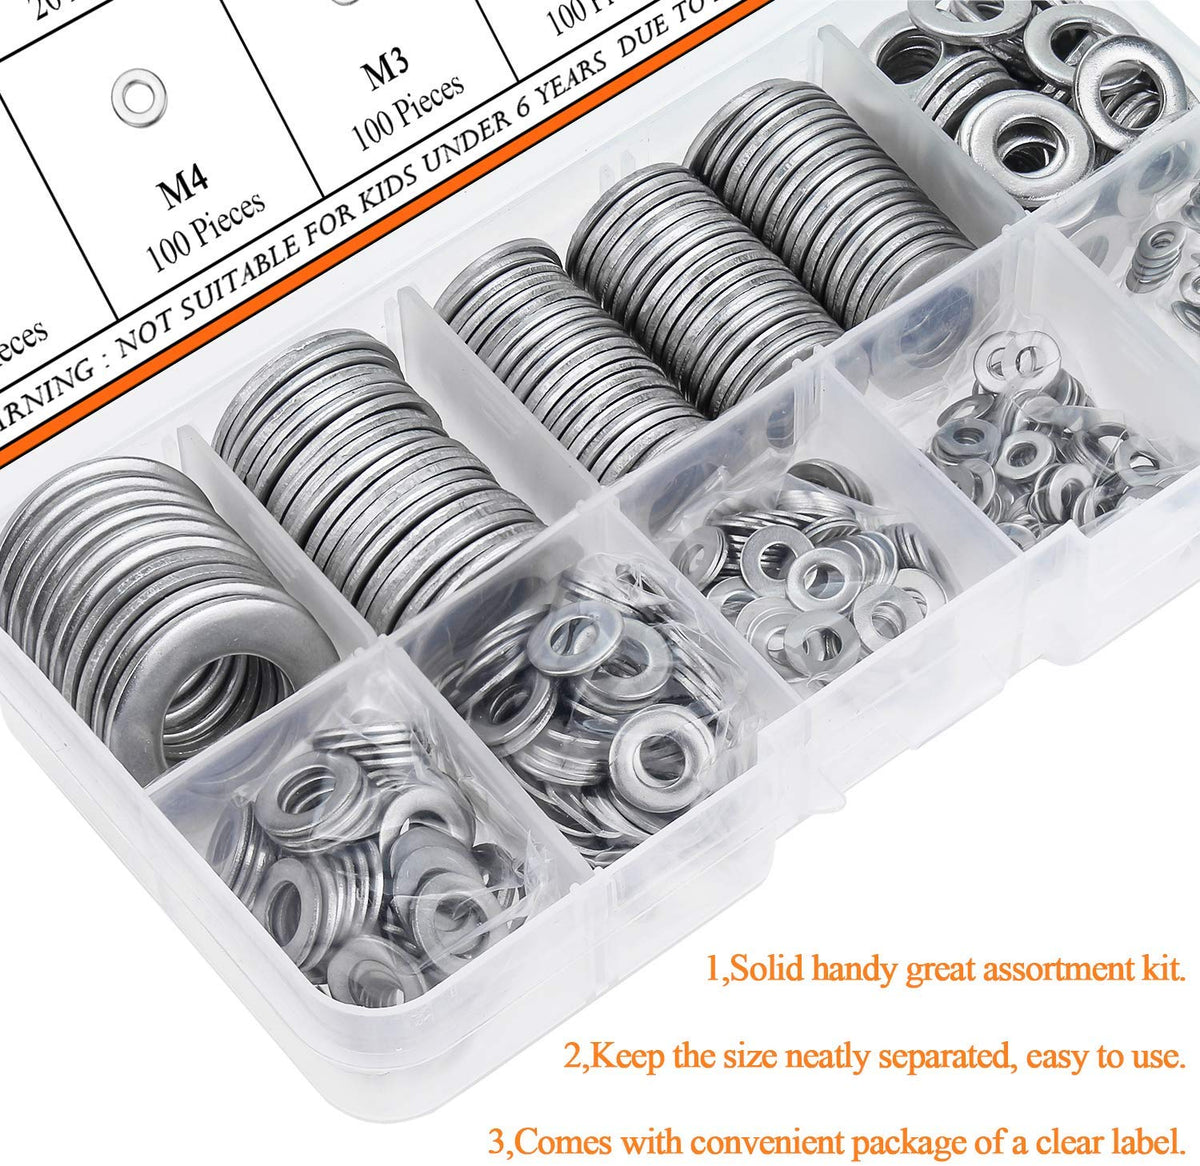 HELIFOUNER 600 Pieces 9 Sizes 304 Stainless Steel Flat Washers